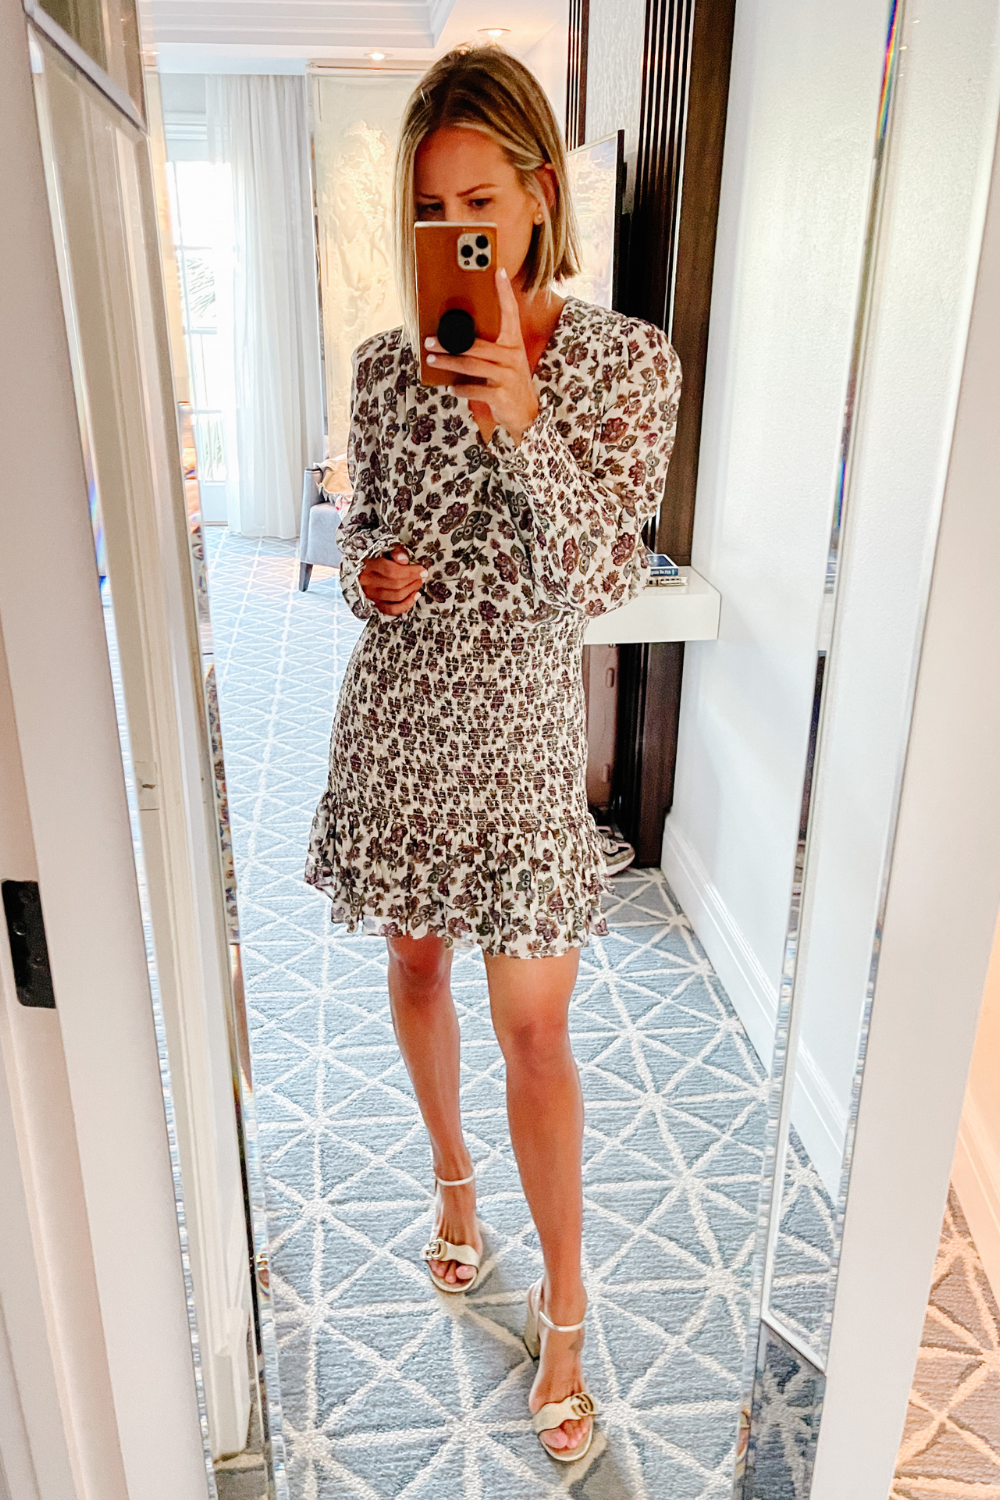 Suzanne in a Veronica Beard mini dress and heels 